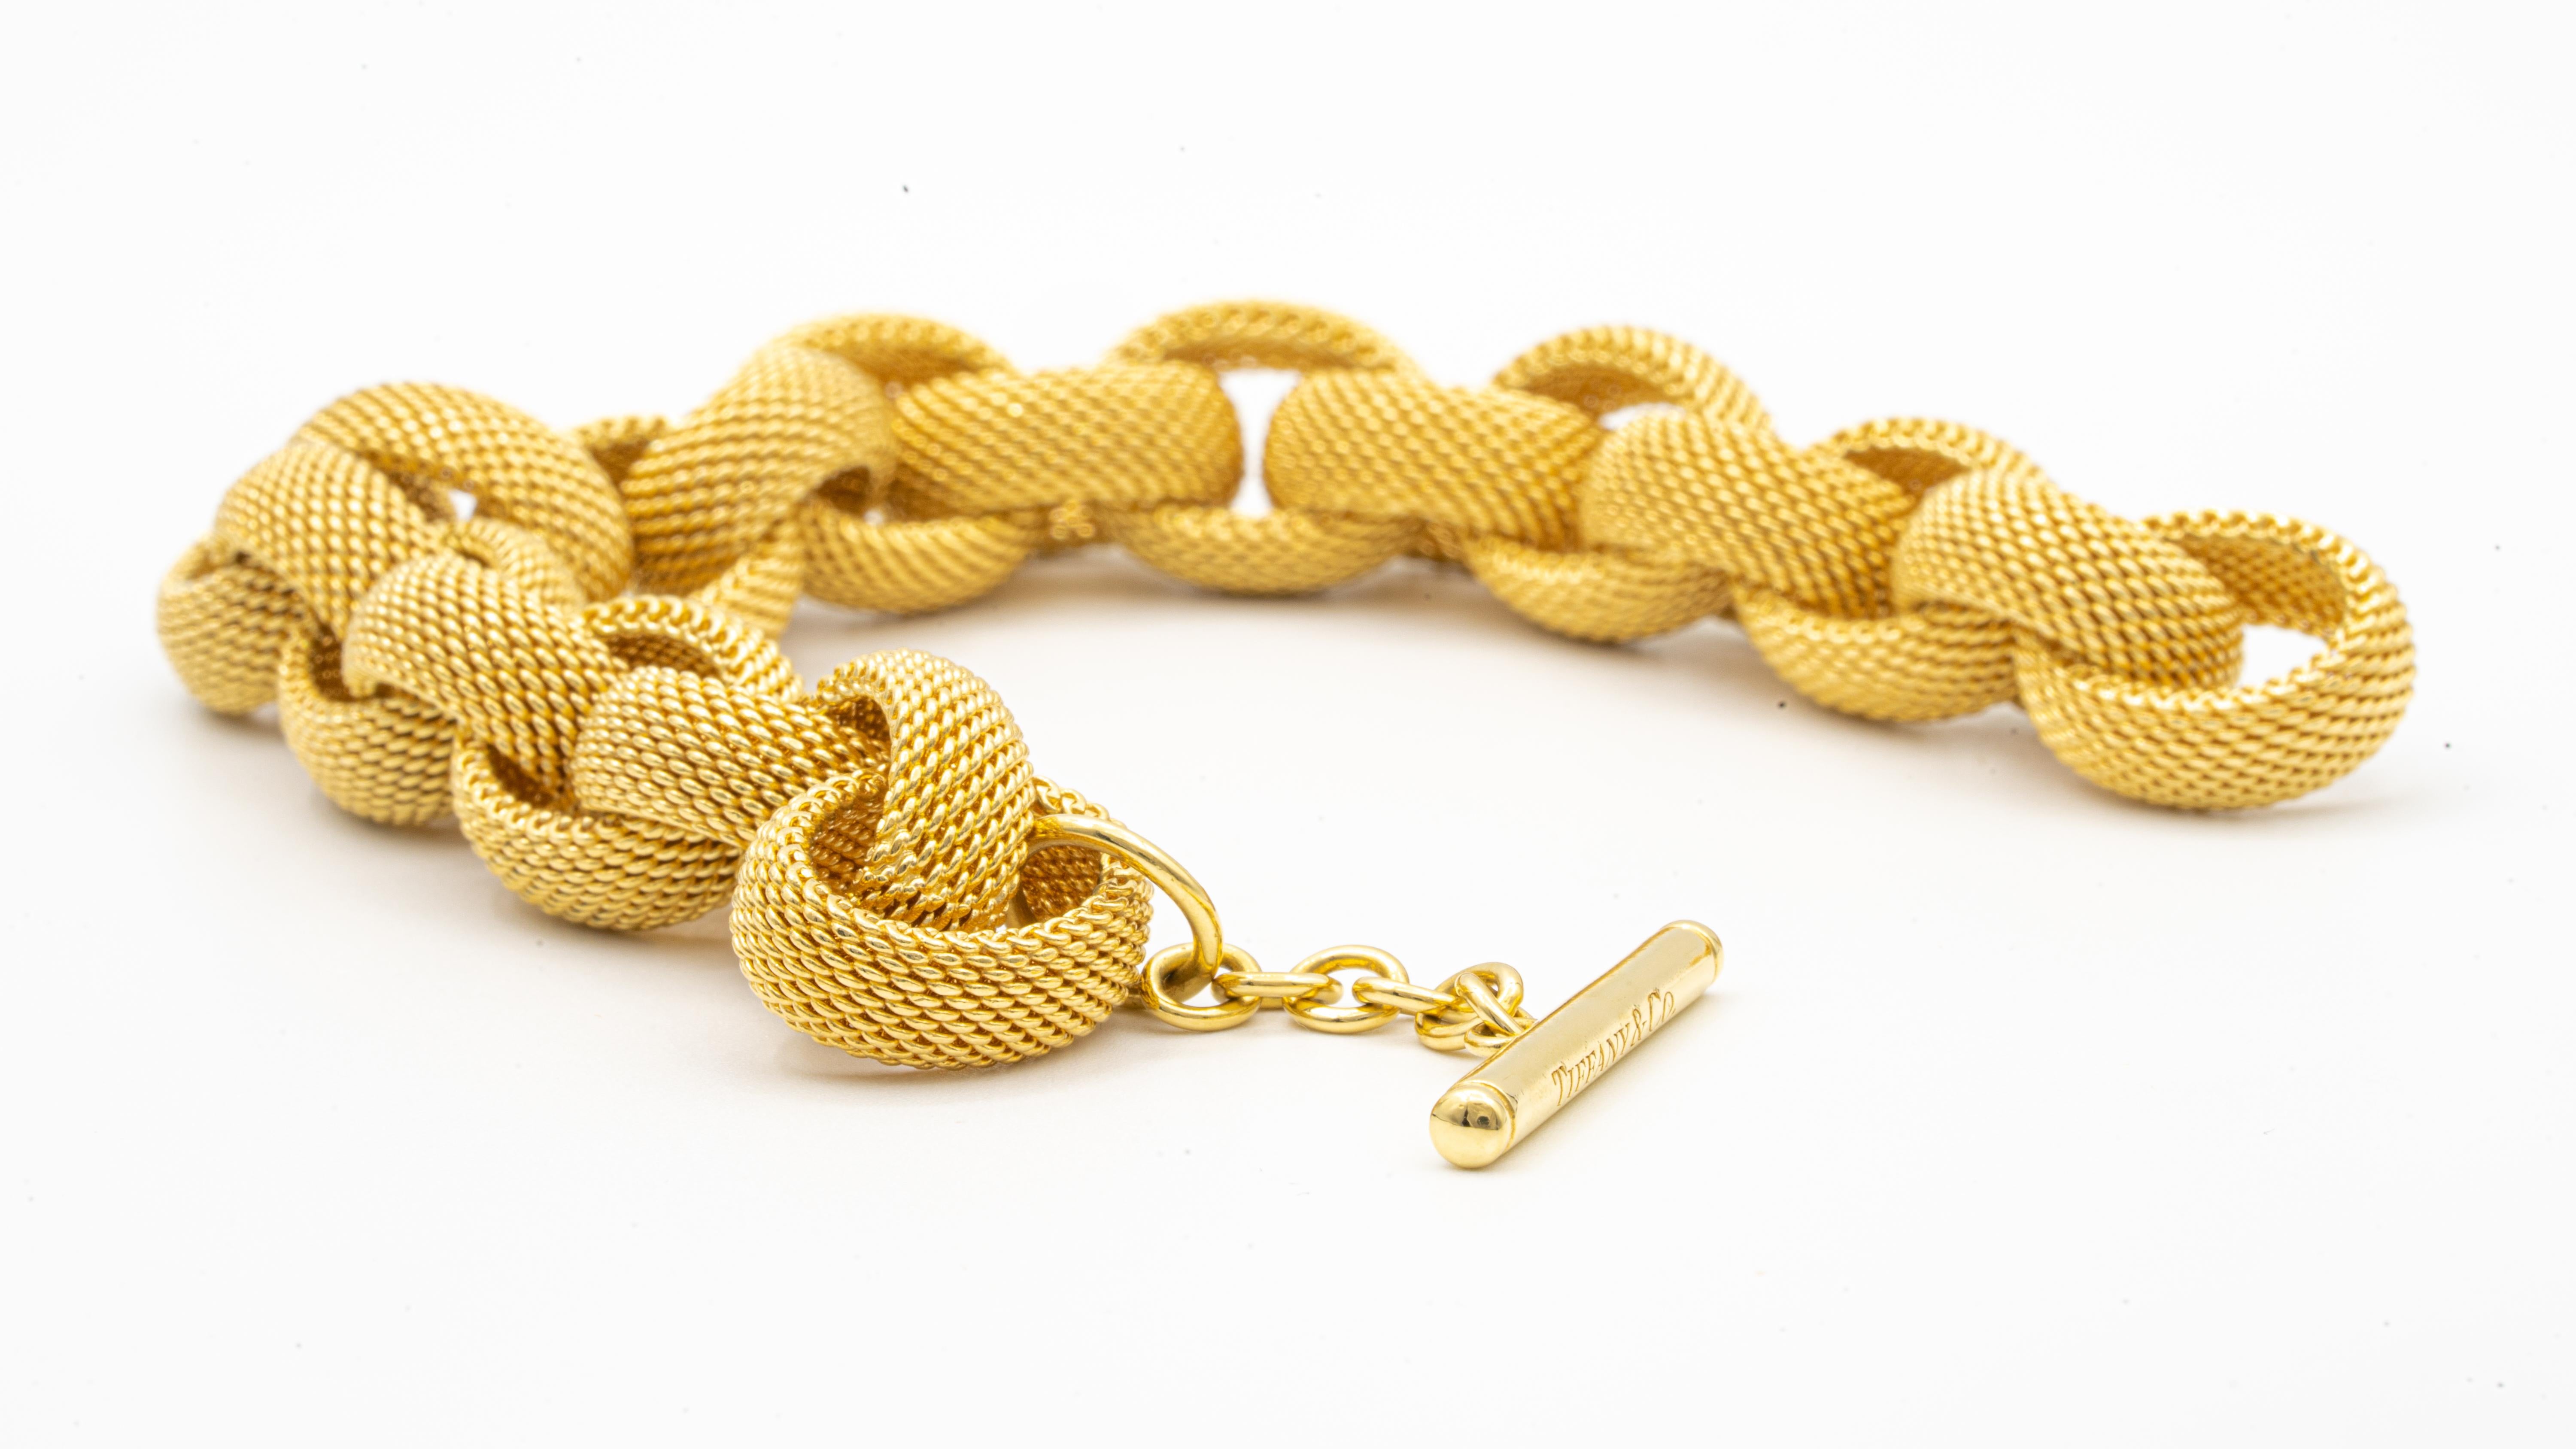 Tiffany & Co. Gold Link Toggle Bracelet finely crafted in 18 Karat yellow gold , comprised of interlocking woven mesh oval links. Matte finish mixed with high polished gold.
Hallmarks: Tiffany & Co . 
Weight: 77.7 grams. 
Length: 8.5 inches with